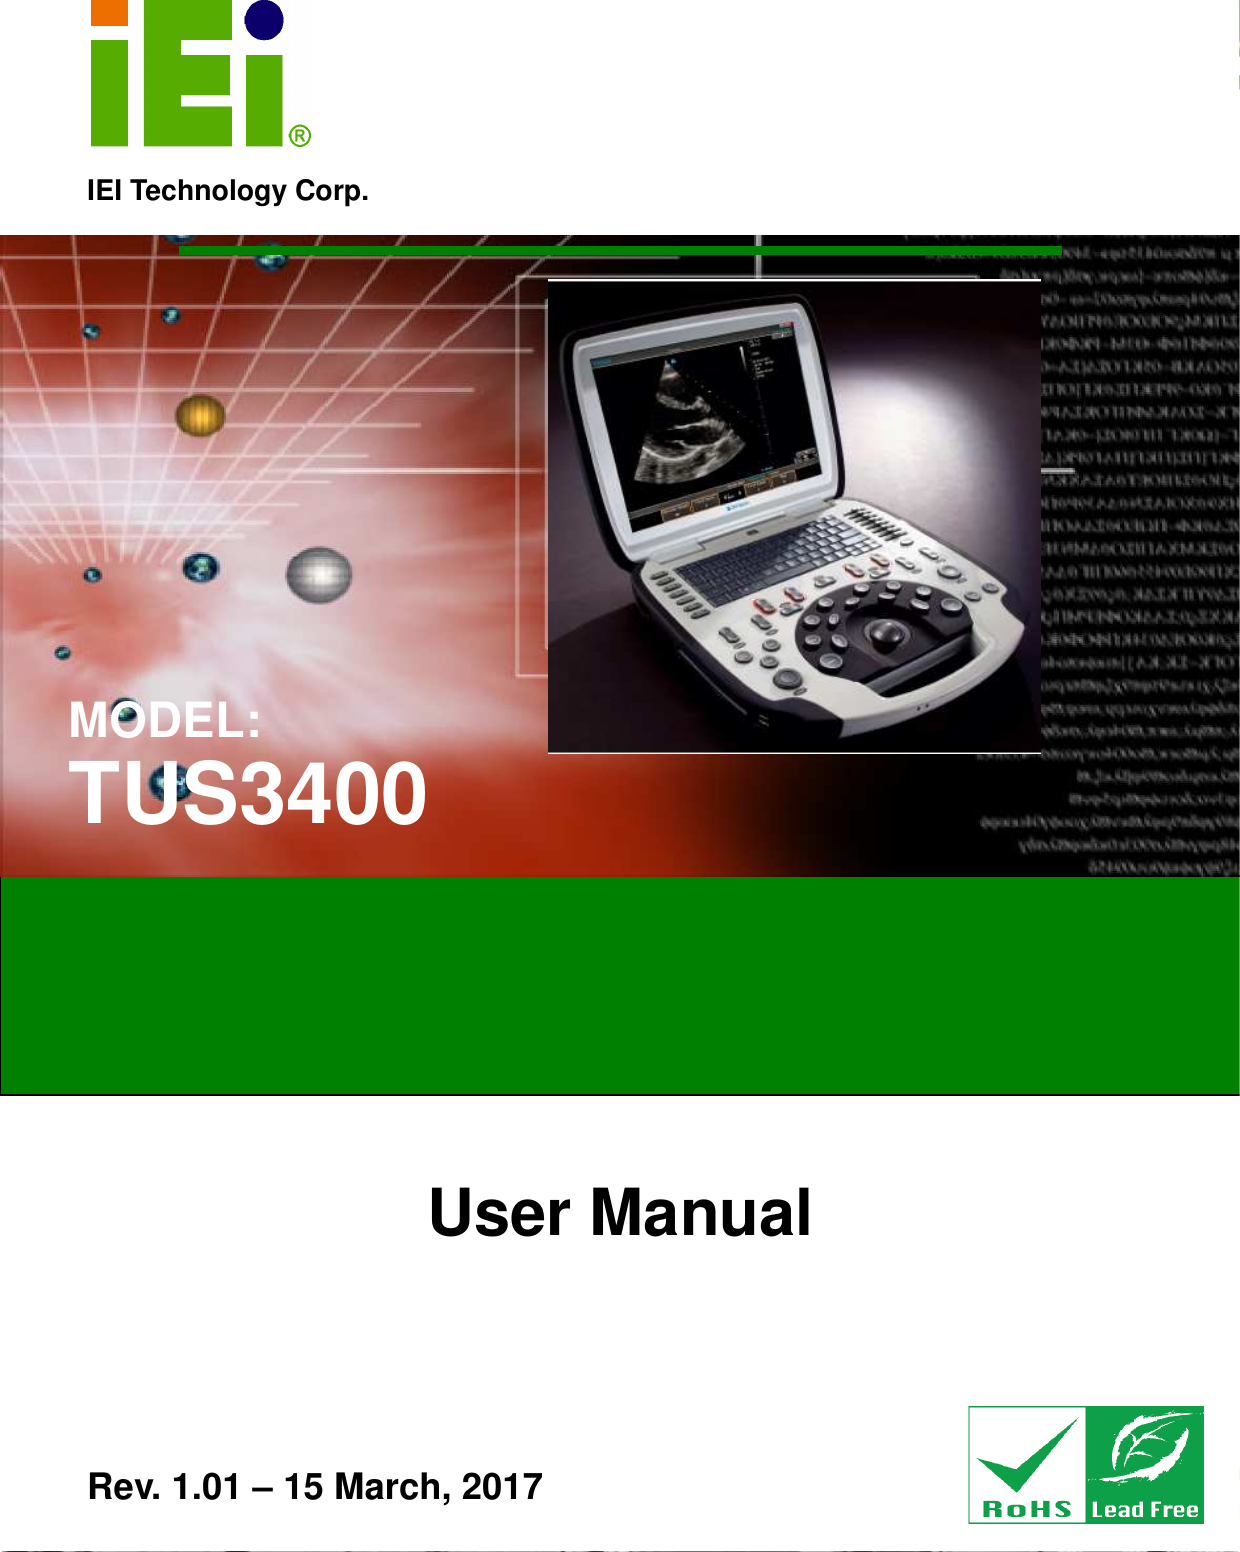   TUS3400 Page 1 IEI Technology Corp. User Manual Panel PC  MODEL: TUS3400 Rev. 1.01 – 15 March, 2017 